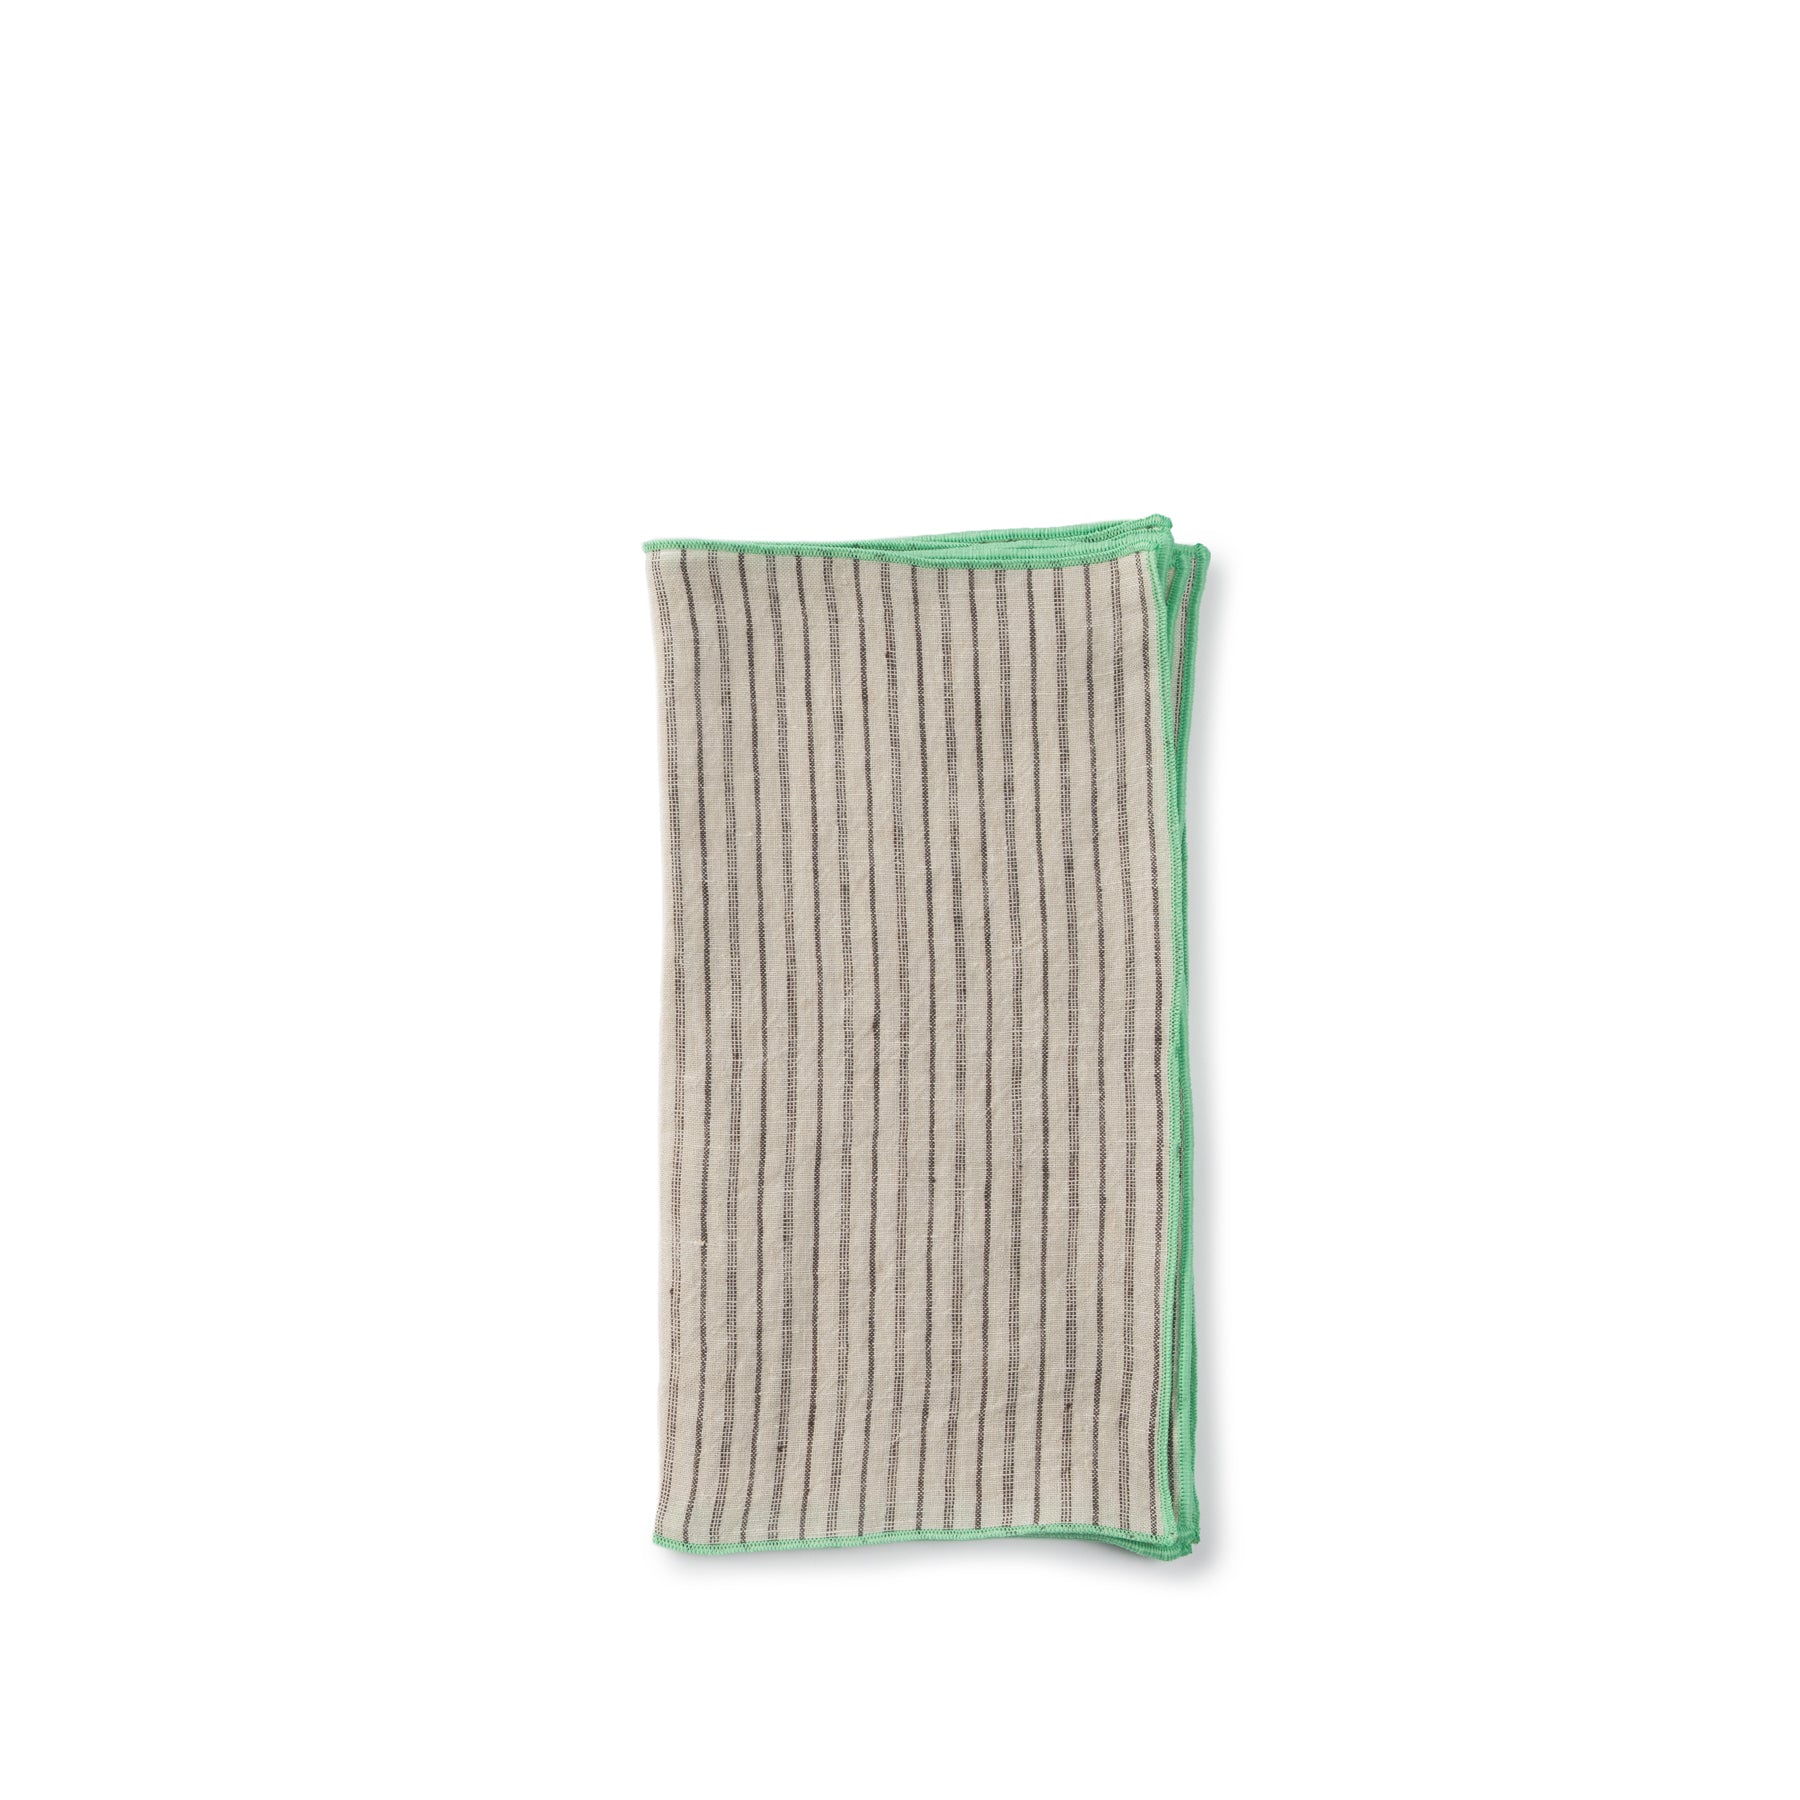 Small Napkin in Mixed Stripe (Set of 4) Zoom Image 1